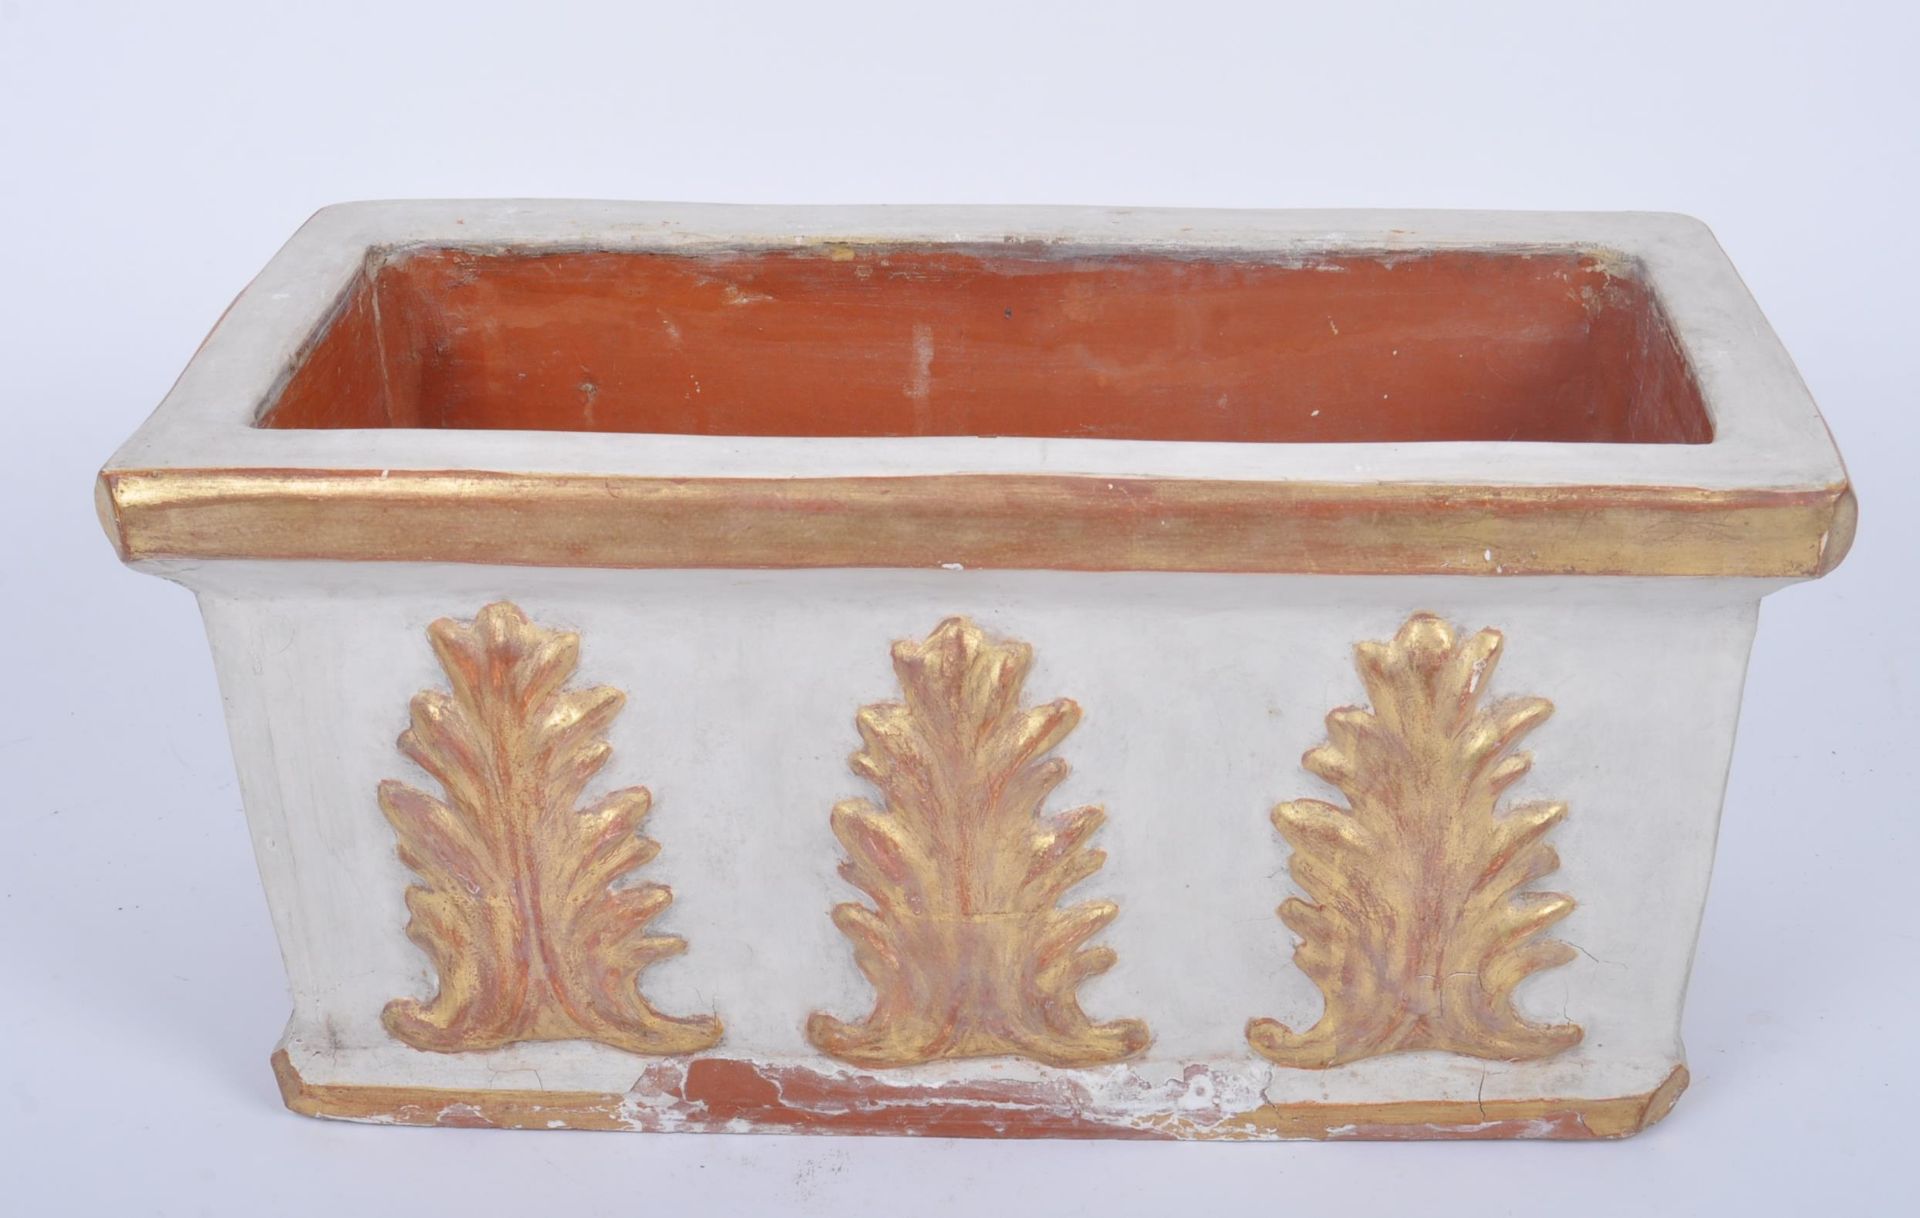 MIDCENTURY NEOCLASSICAL GILDED TERRACOTTA PLANTER - Image 5 of 6